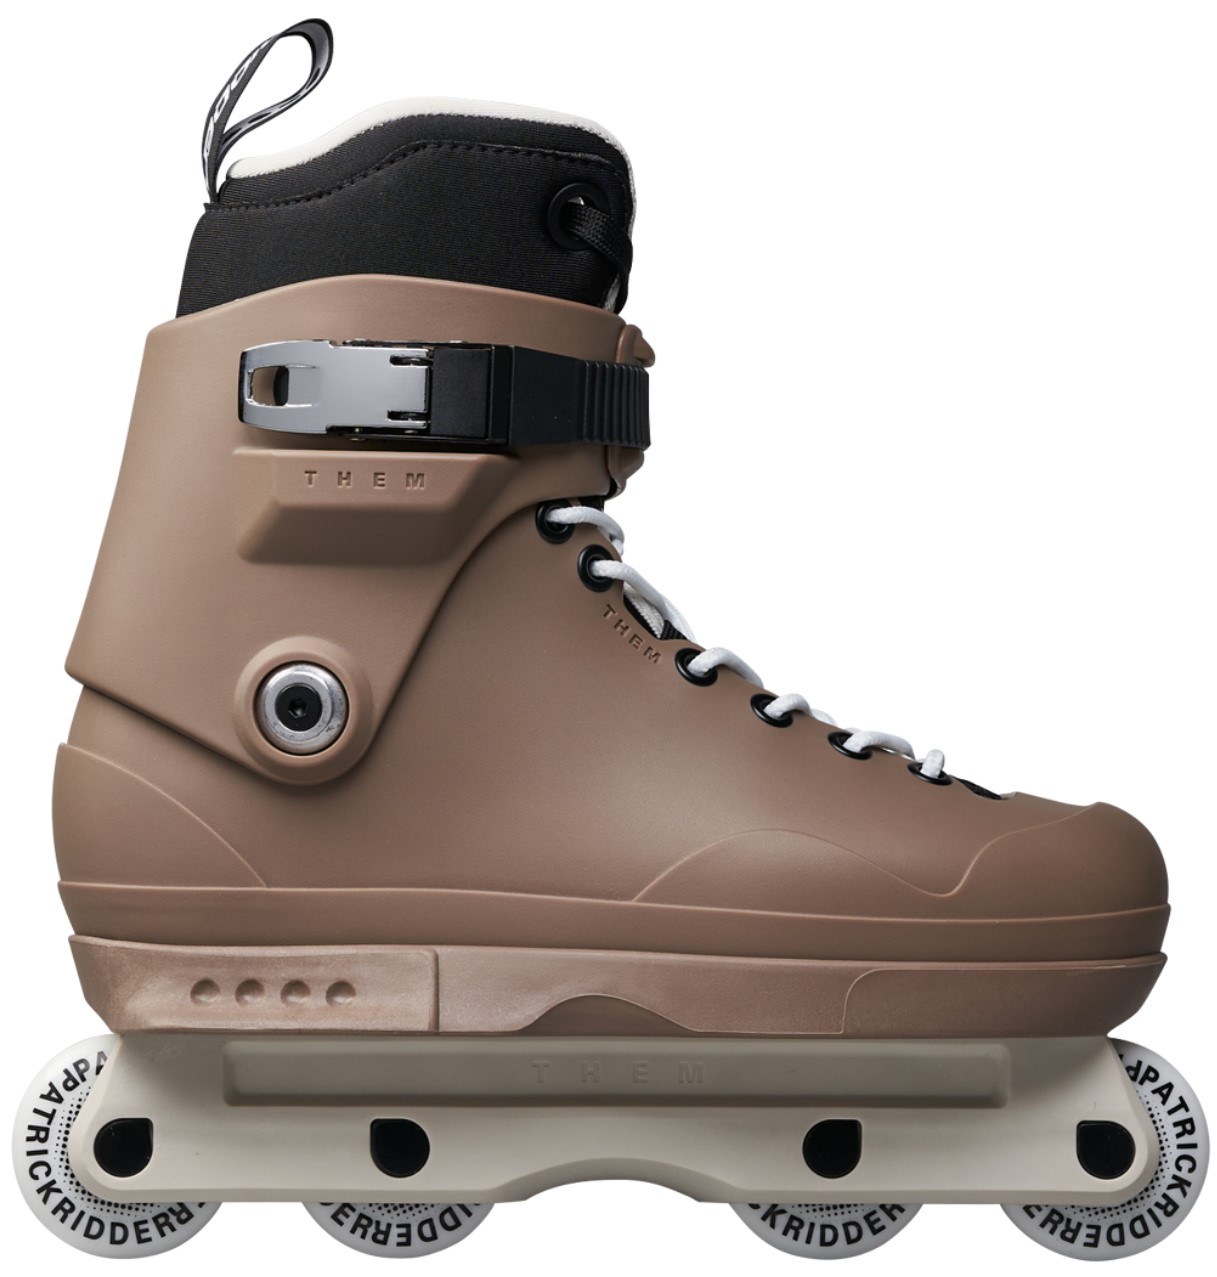 THEM Pat Ridder Pro Model aggressive inline skate in a nice brown colour